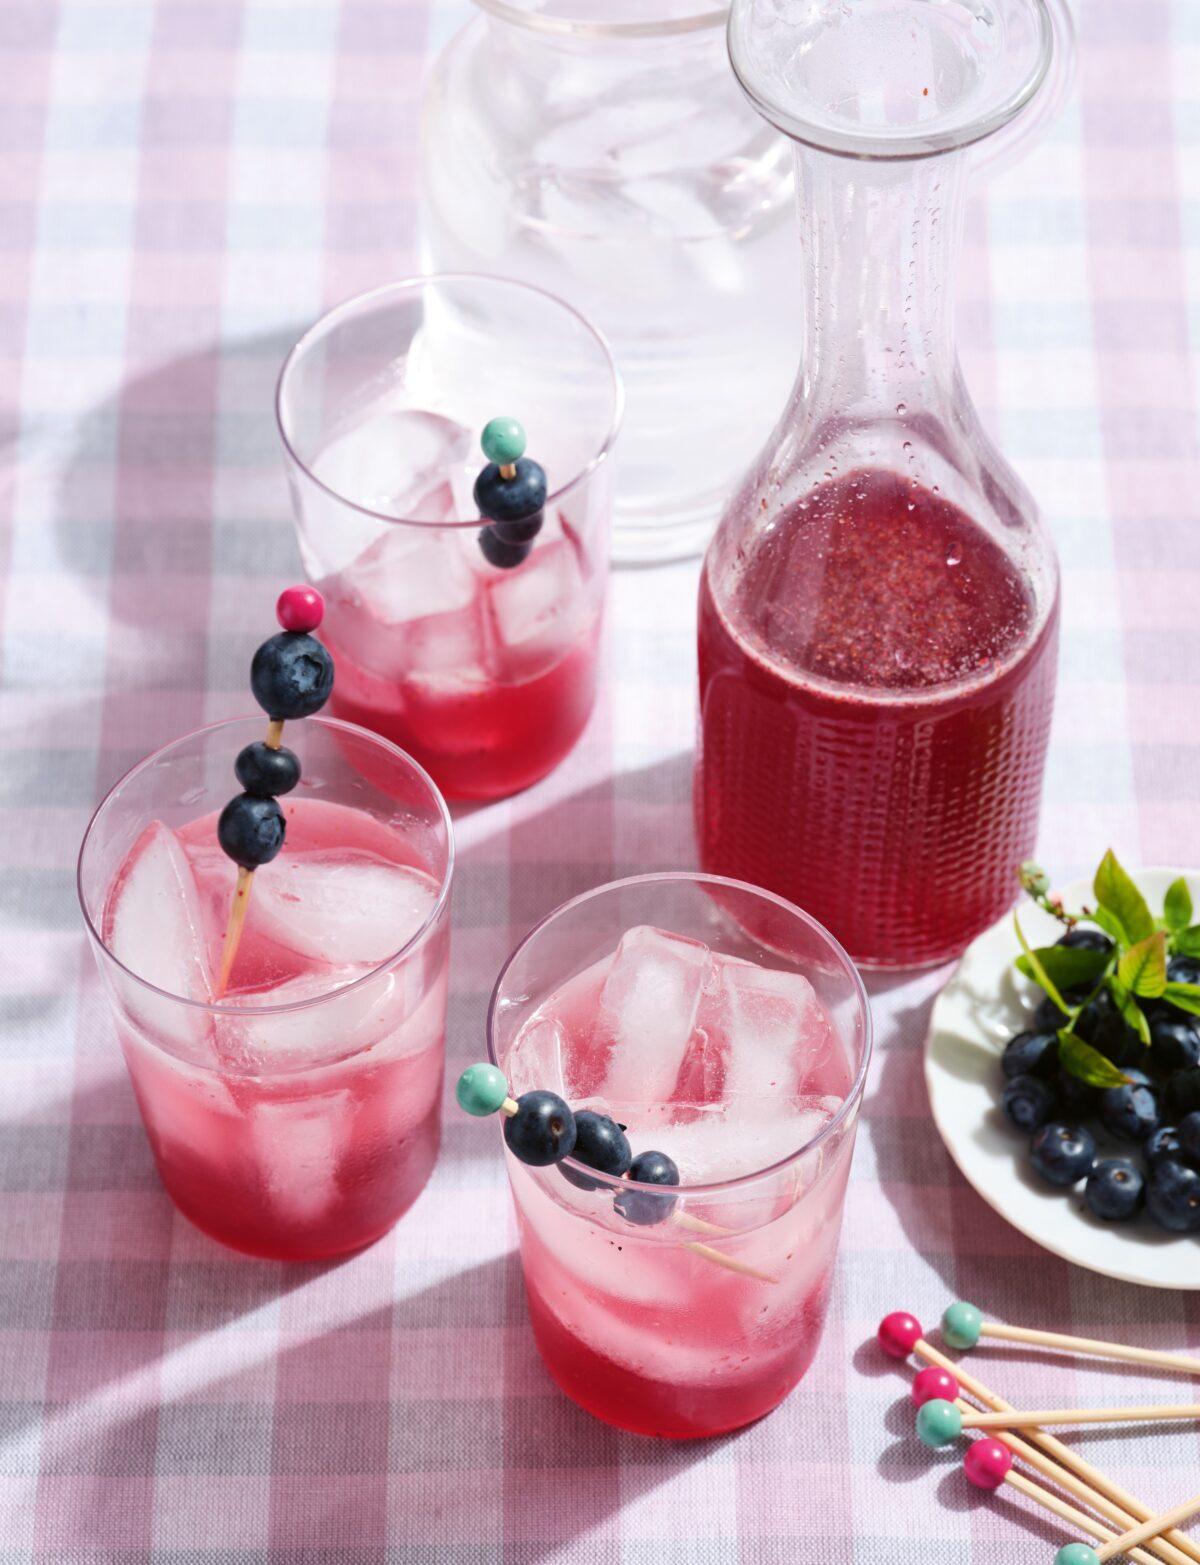 A shrub is a thirst-quenching drink that is most popular in summer months. (Courtesy of Blueberry Love/TNS)